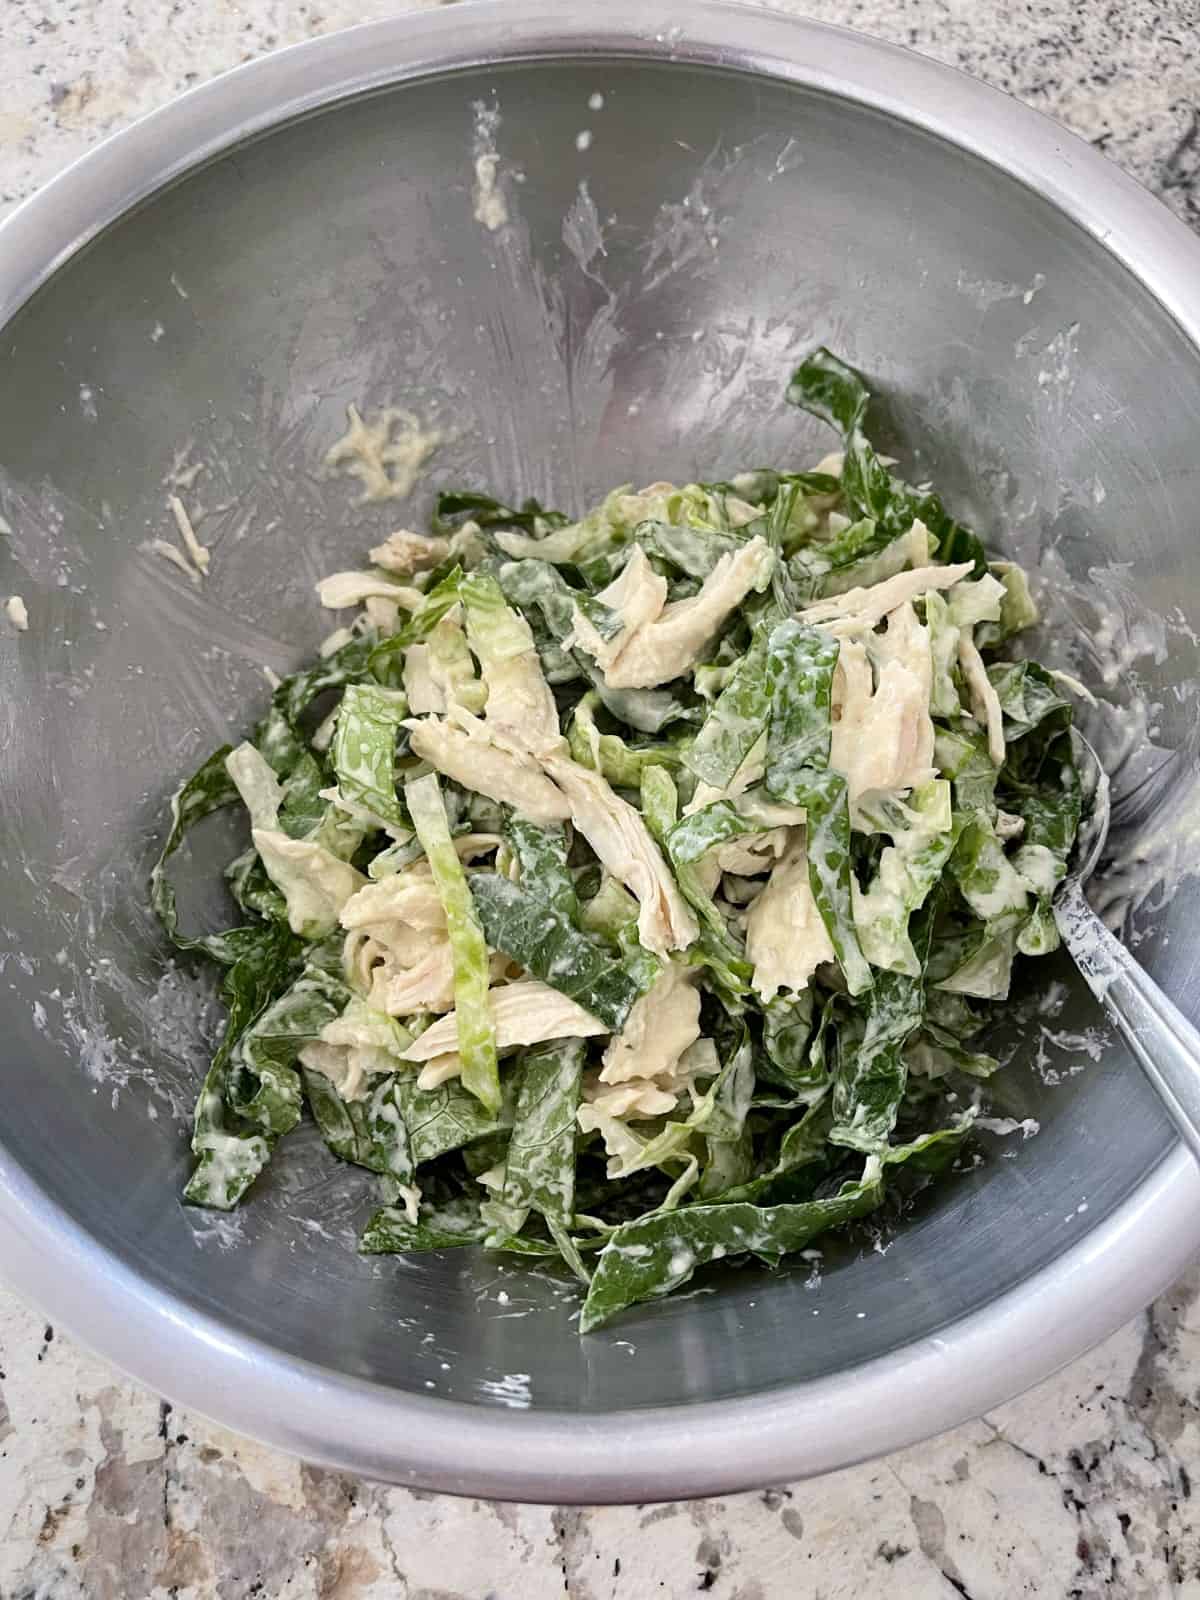 Mixing cooked shredded chicken, shredded Romaine and light homemade Caesar dressing in mixing bowl with spoon.